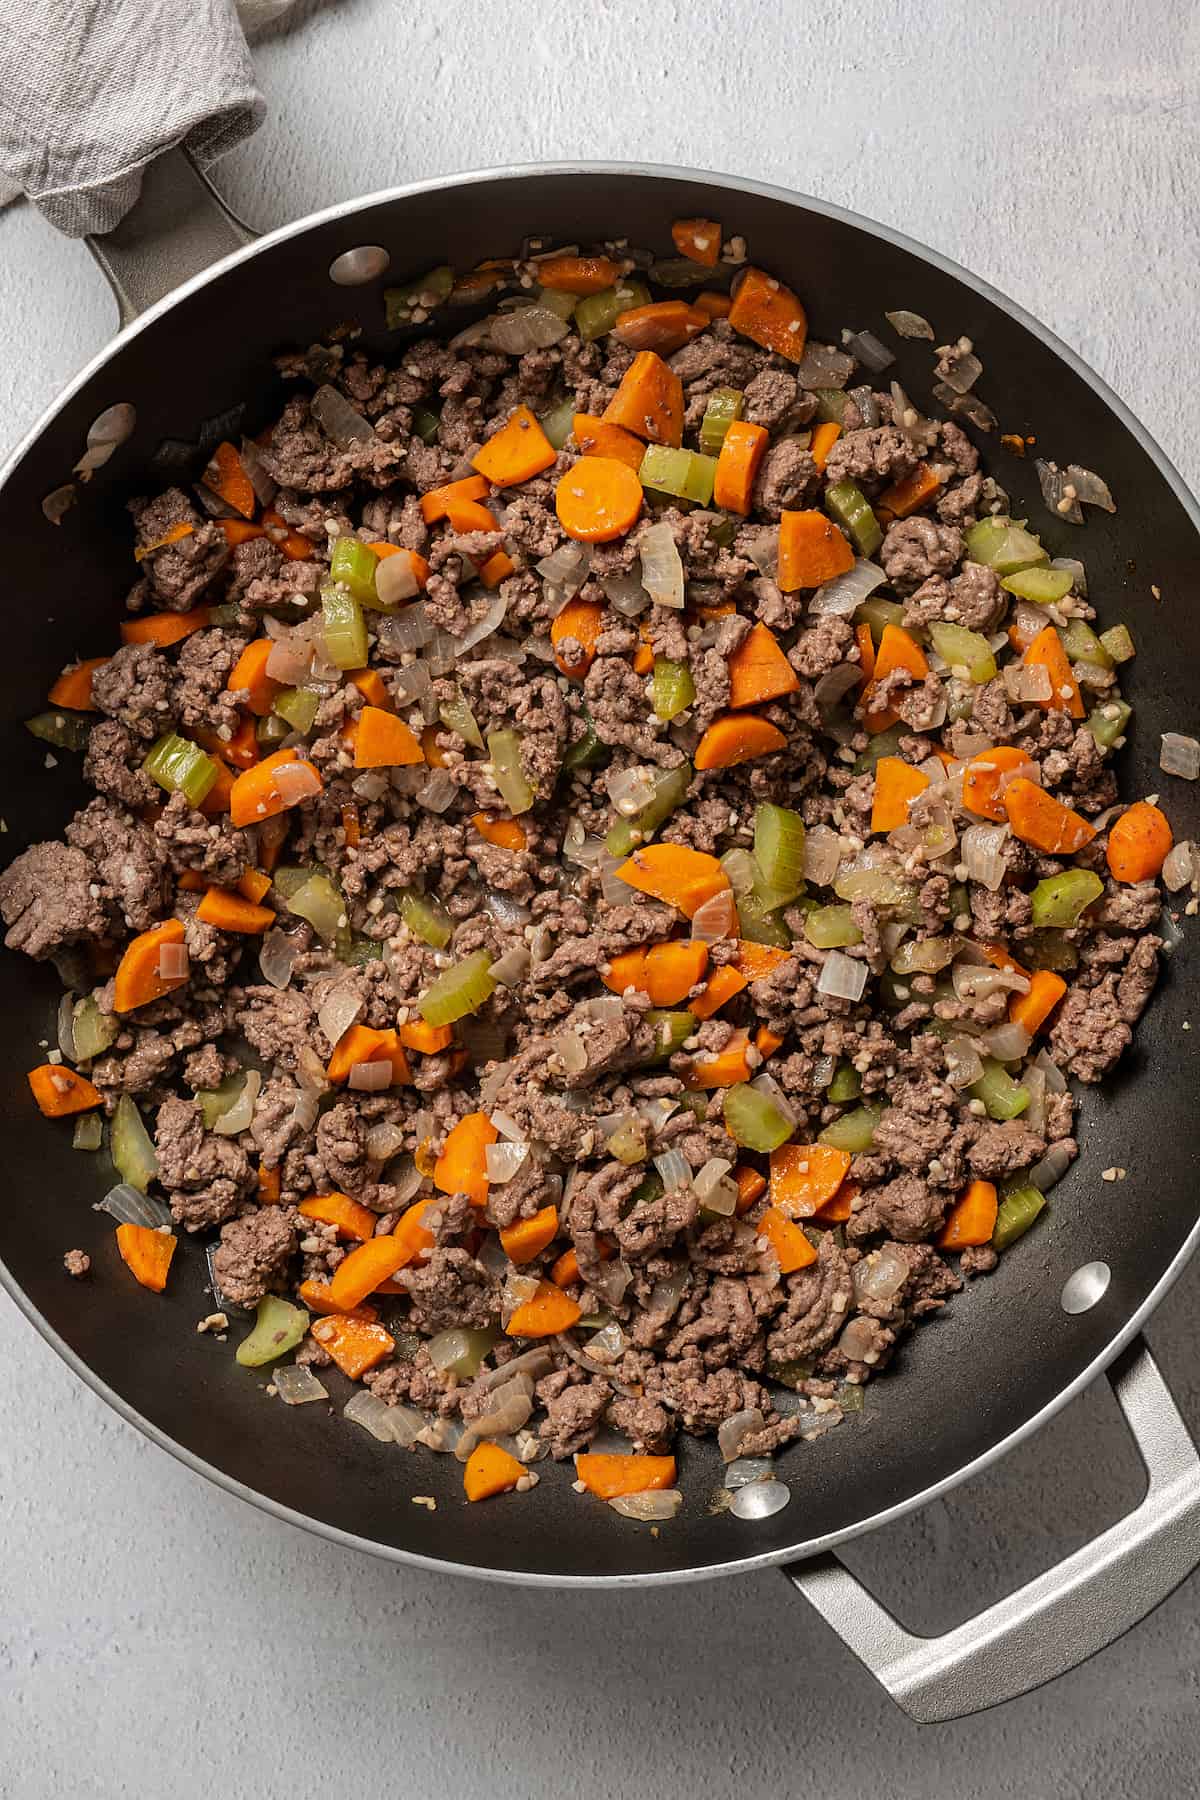 Ground beef and vegetables cooking in a pan.